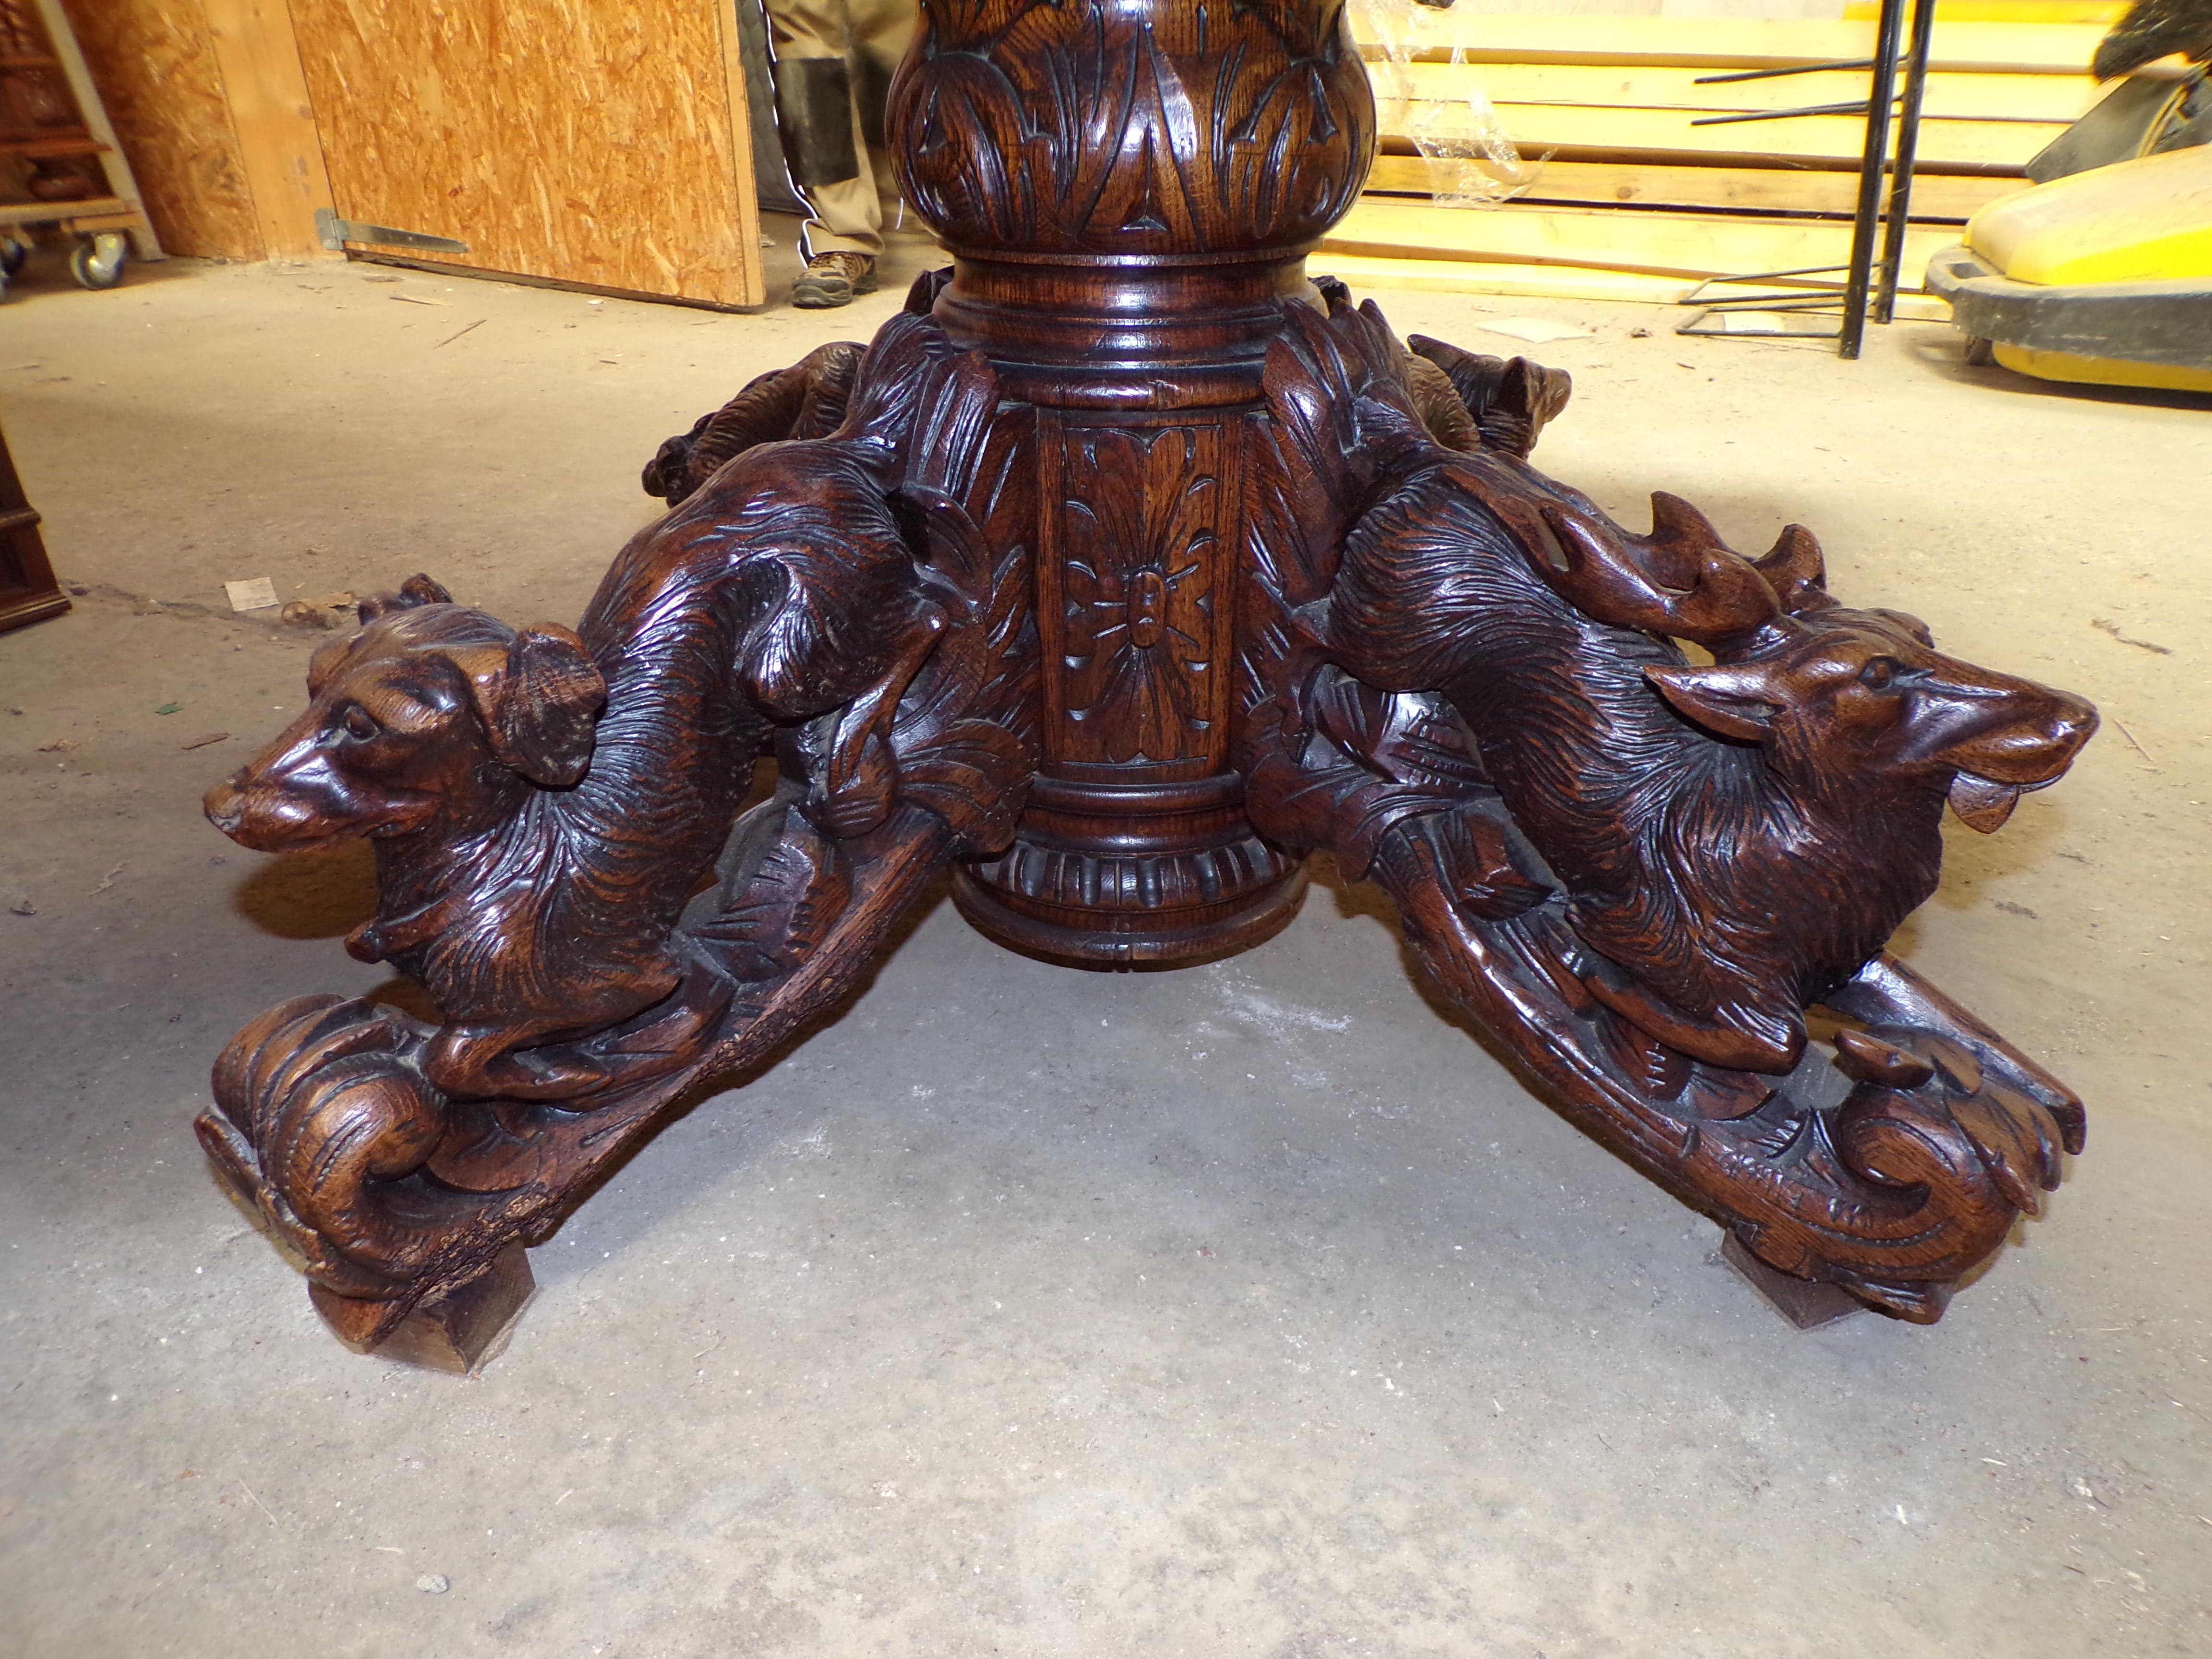 A fine and very rare complete dining set of carved Black Forest style Oak Furniture, circa 1880. This fabulous set is all original with no restoration and has always been together
WE OFFER FREE SHIPPING TO ANY DESTINATION ON THIS FINE SET